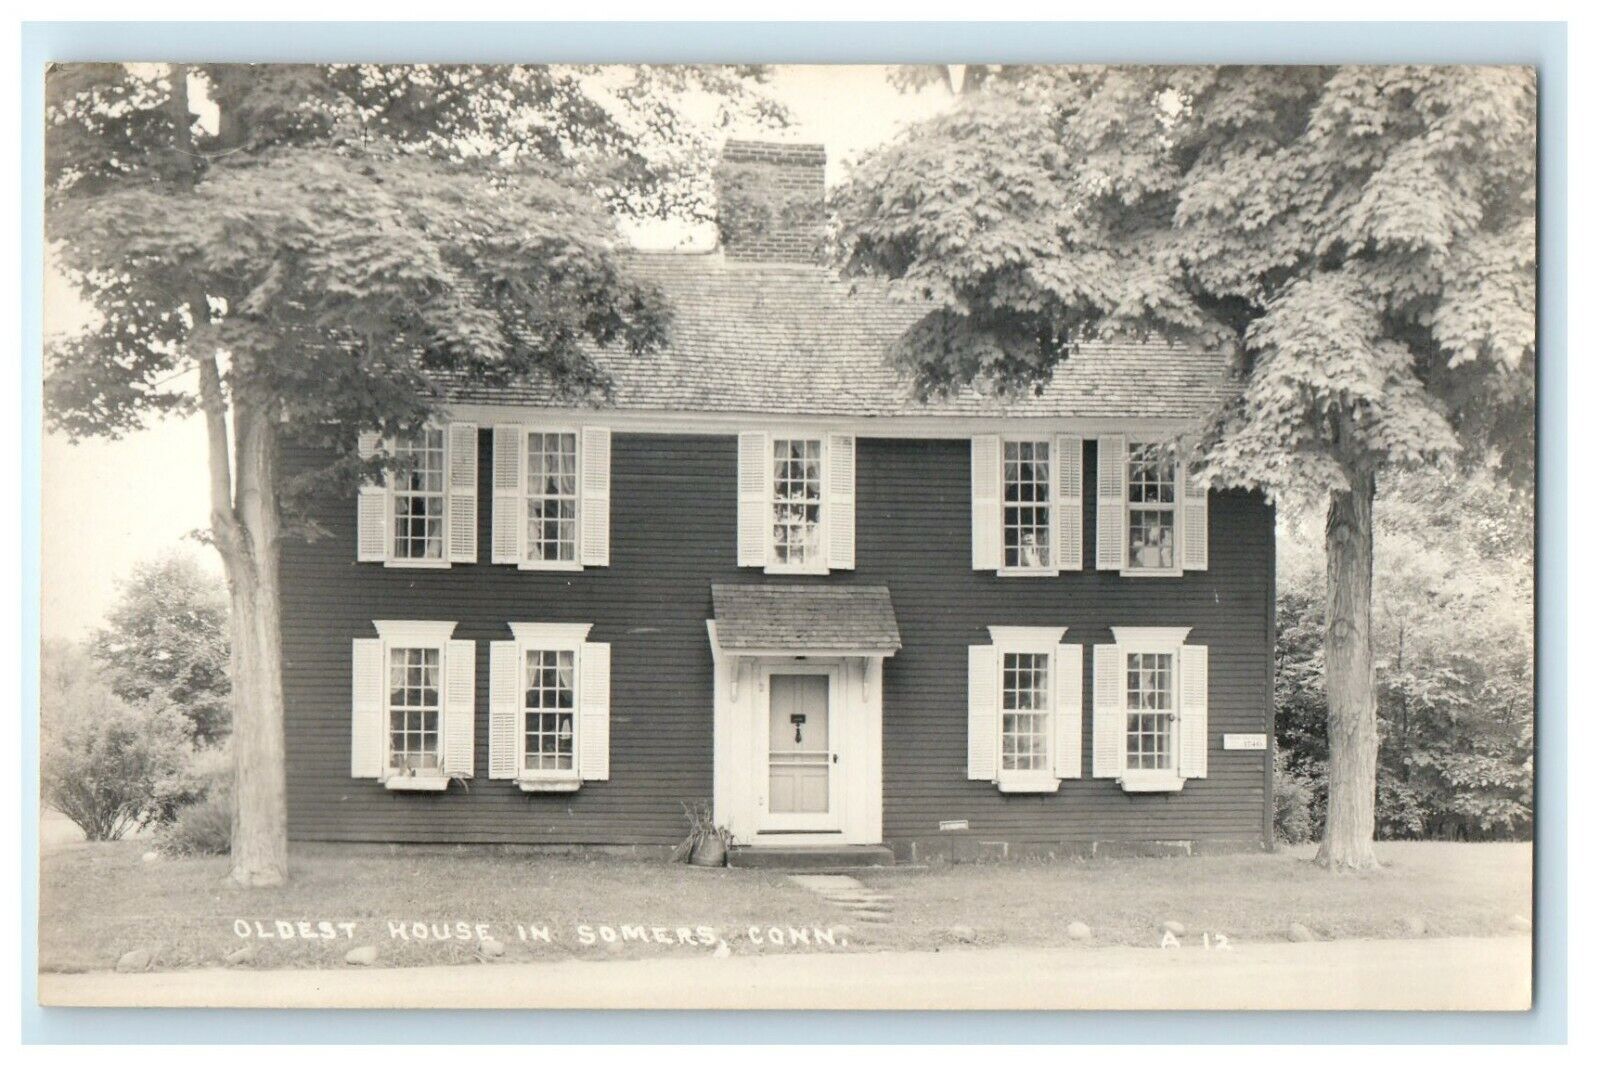 c1910's Oldest House In Somers Connecticut CT RPPC Photo Antique Postcard